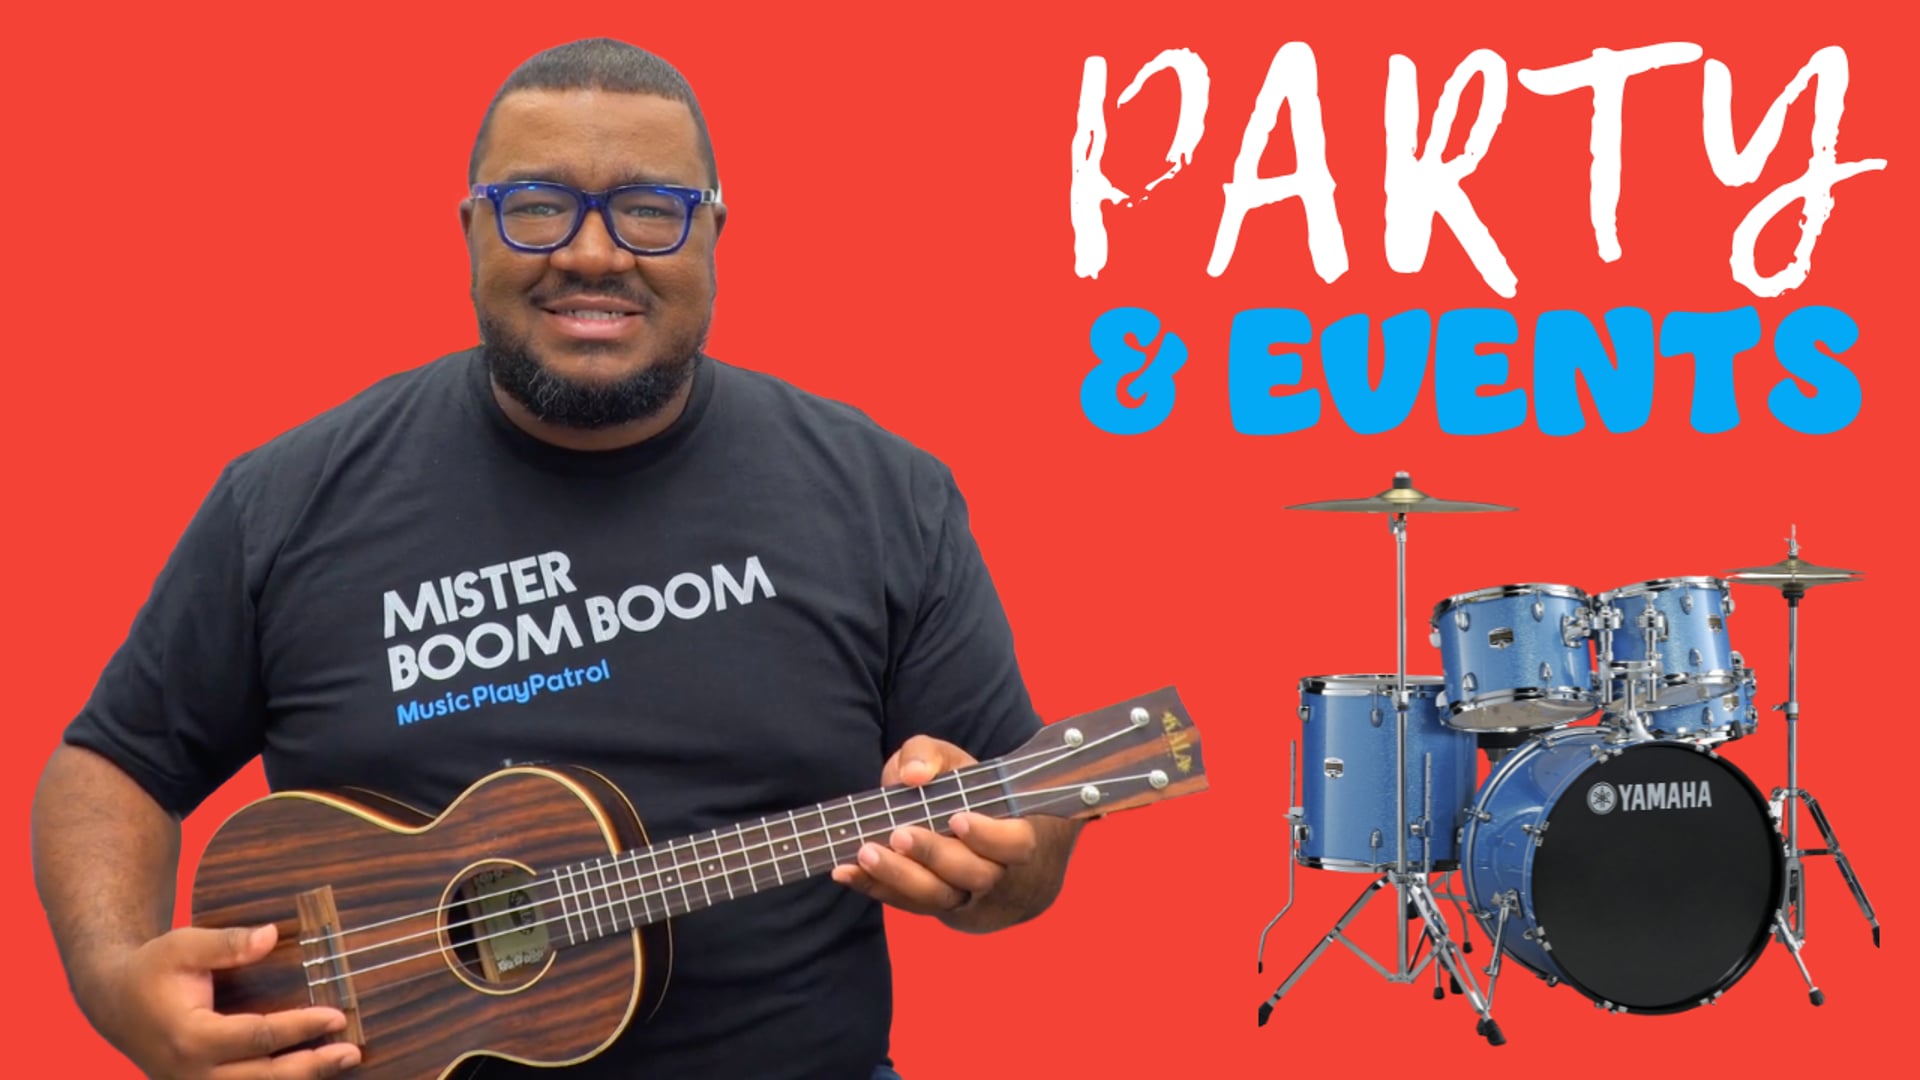 Promotional video thumbnail 1 for Music Play Patrol featuring Mister Boom Boom